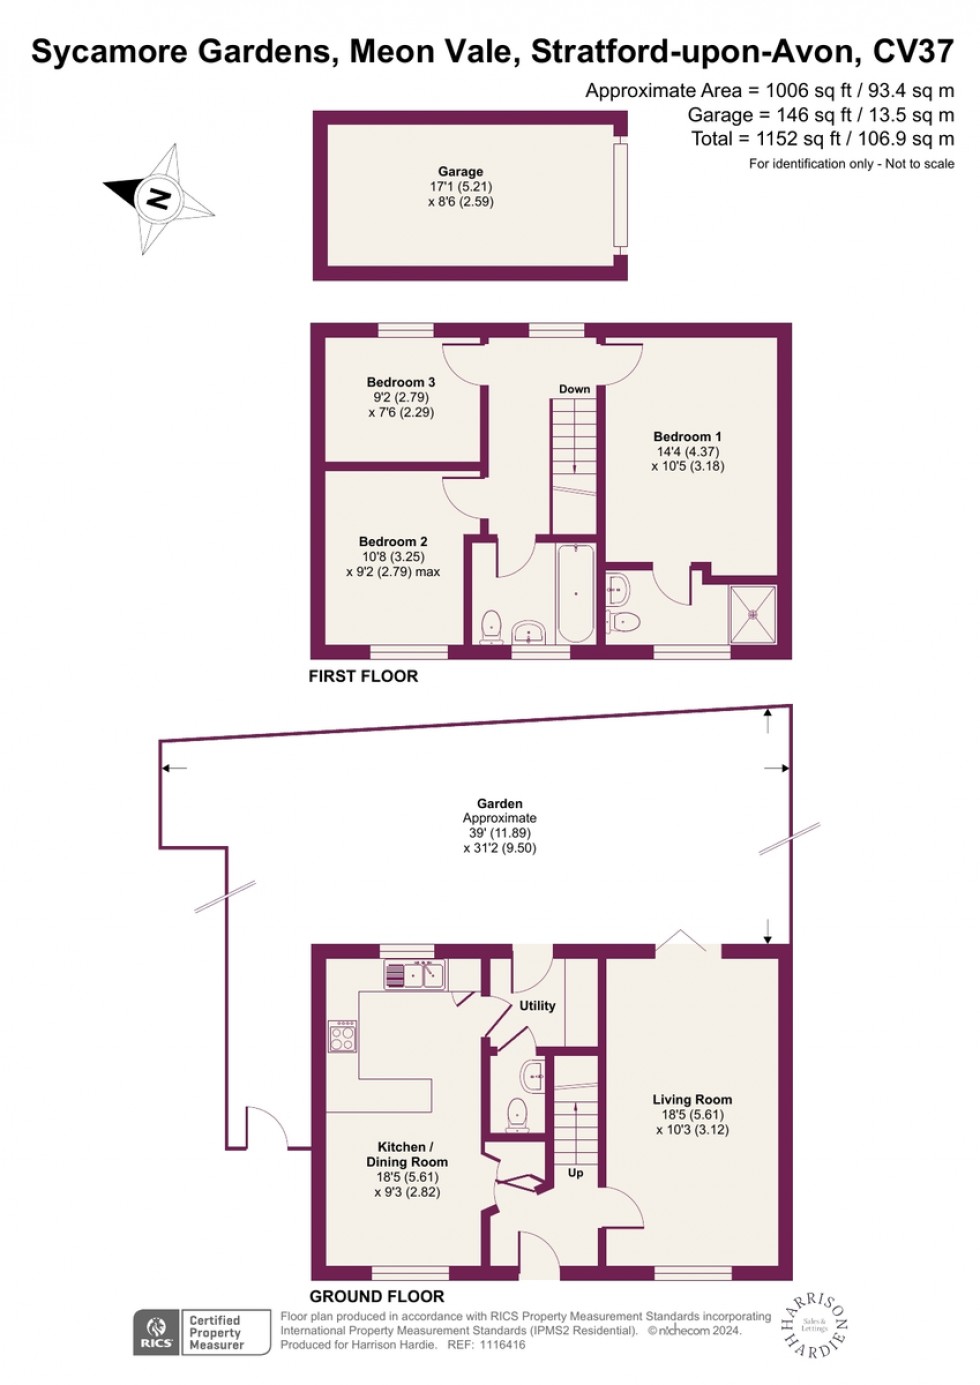 Floorplan for Sycamore Gardens, Meon Vale